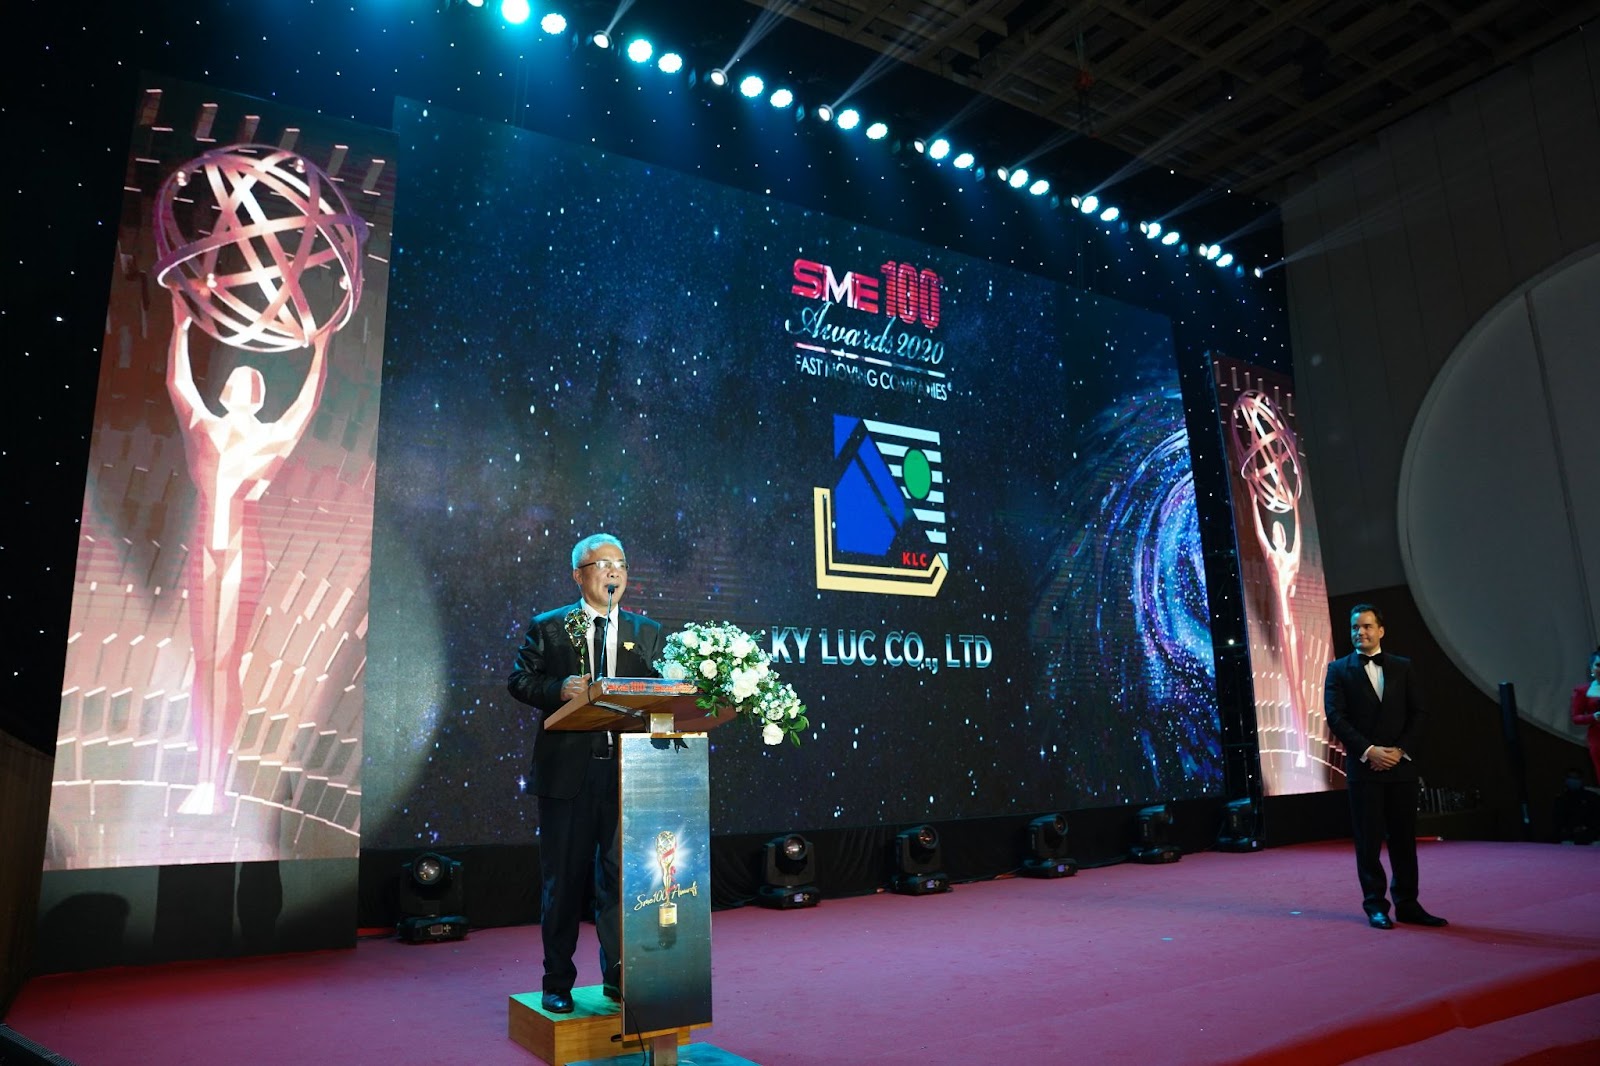 Ky Luc Co., Ltd became one of 38 enterprises which are honored at the SME 100 Awards in 2020